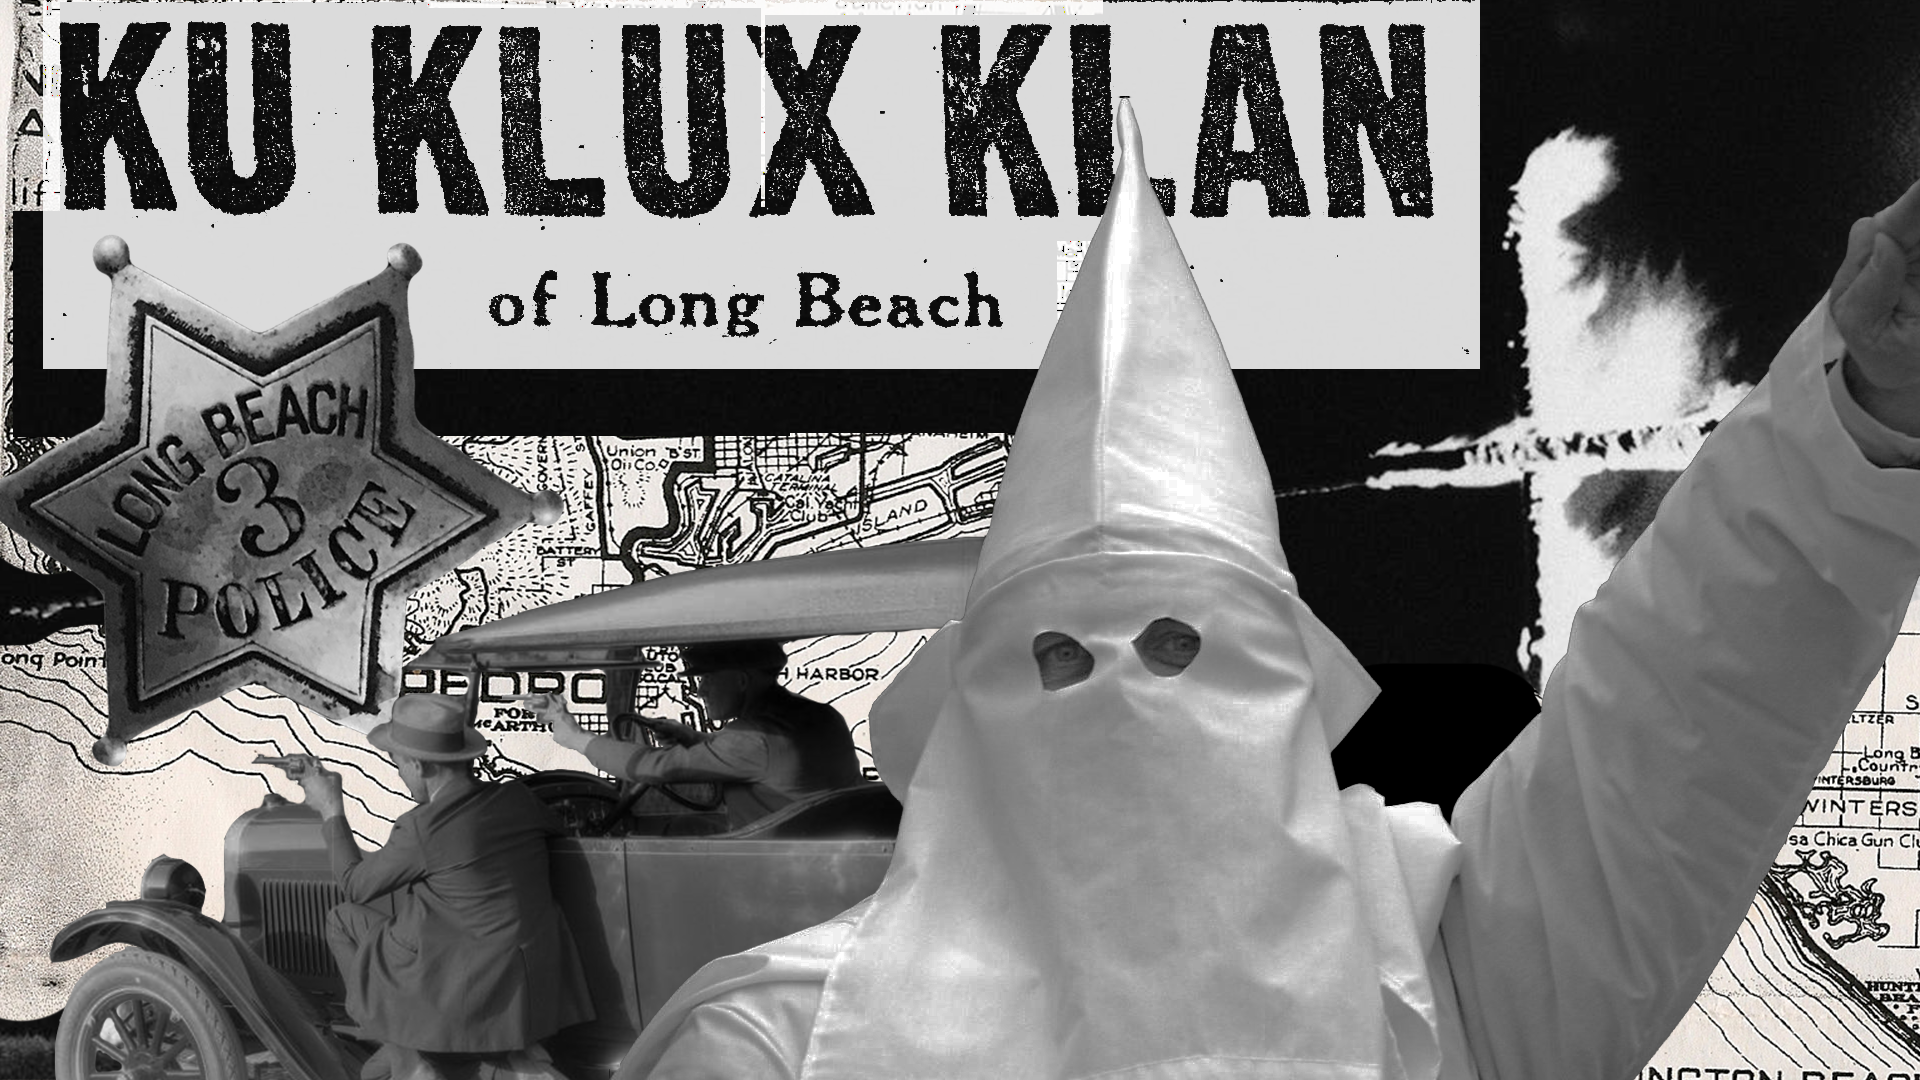 How 'The Birth of a Nation' Revived the Ku Klux Klan